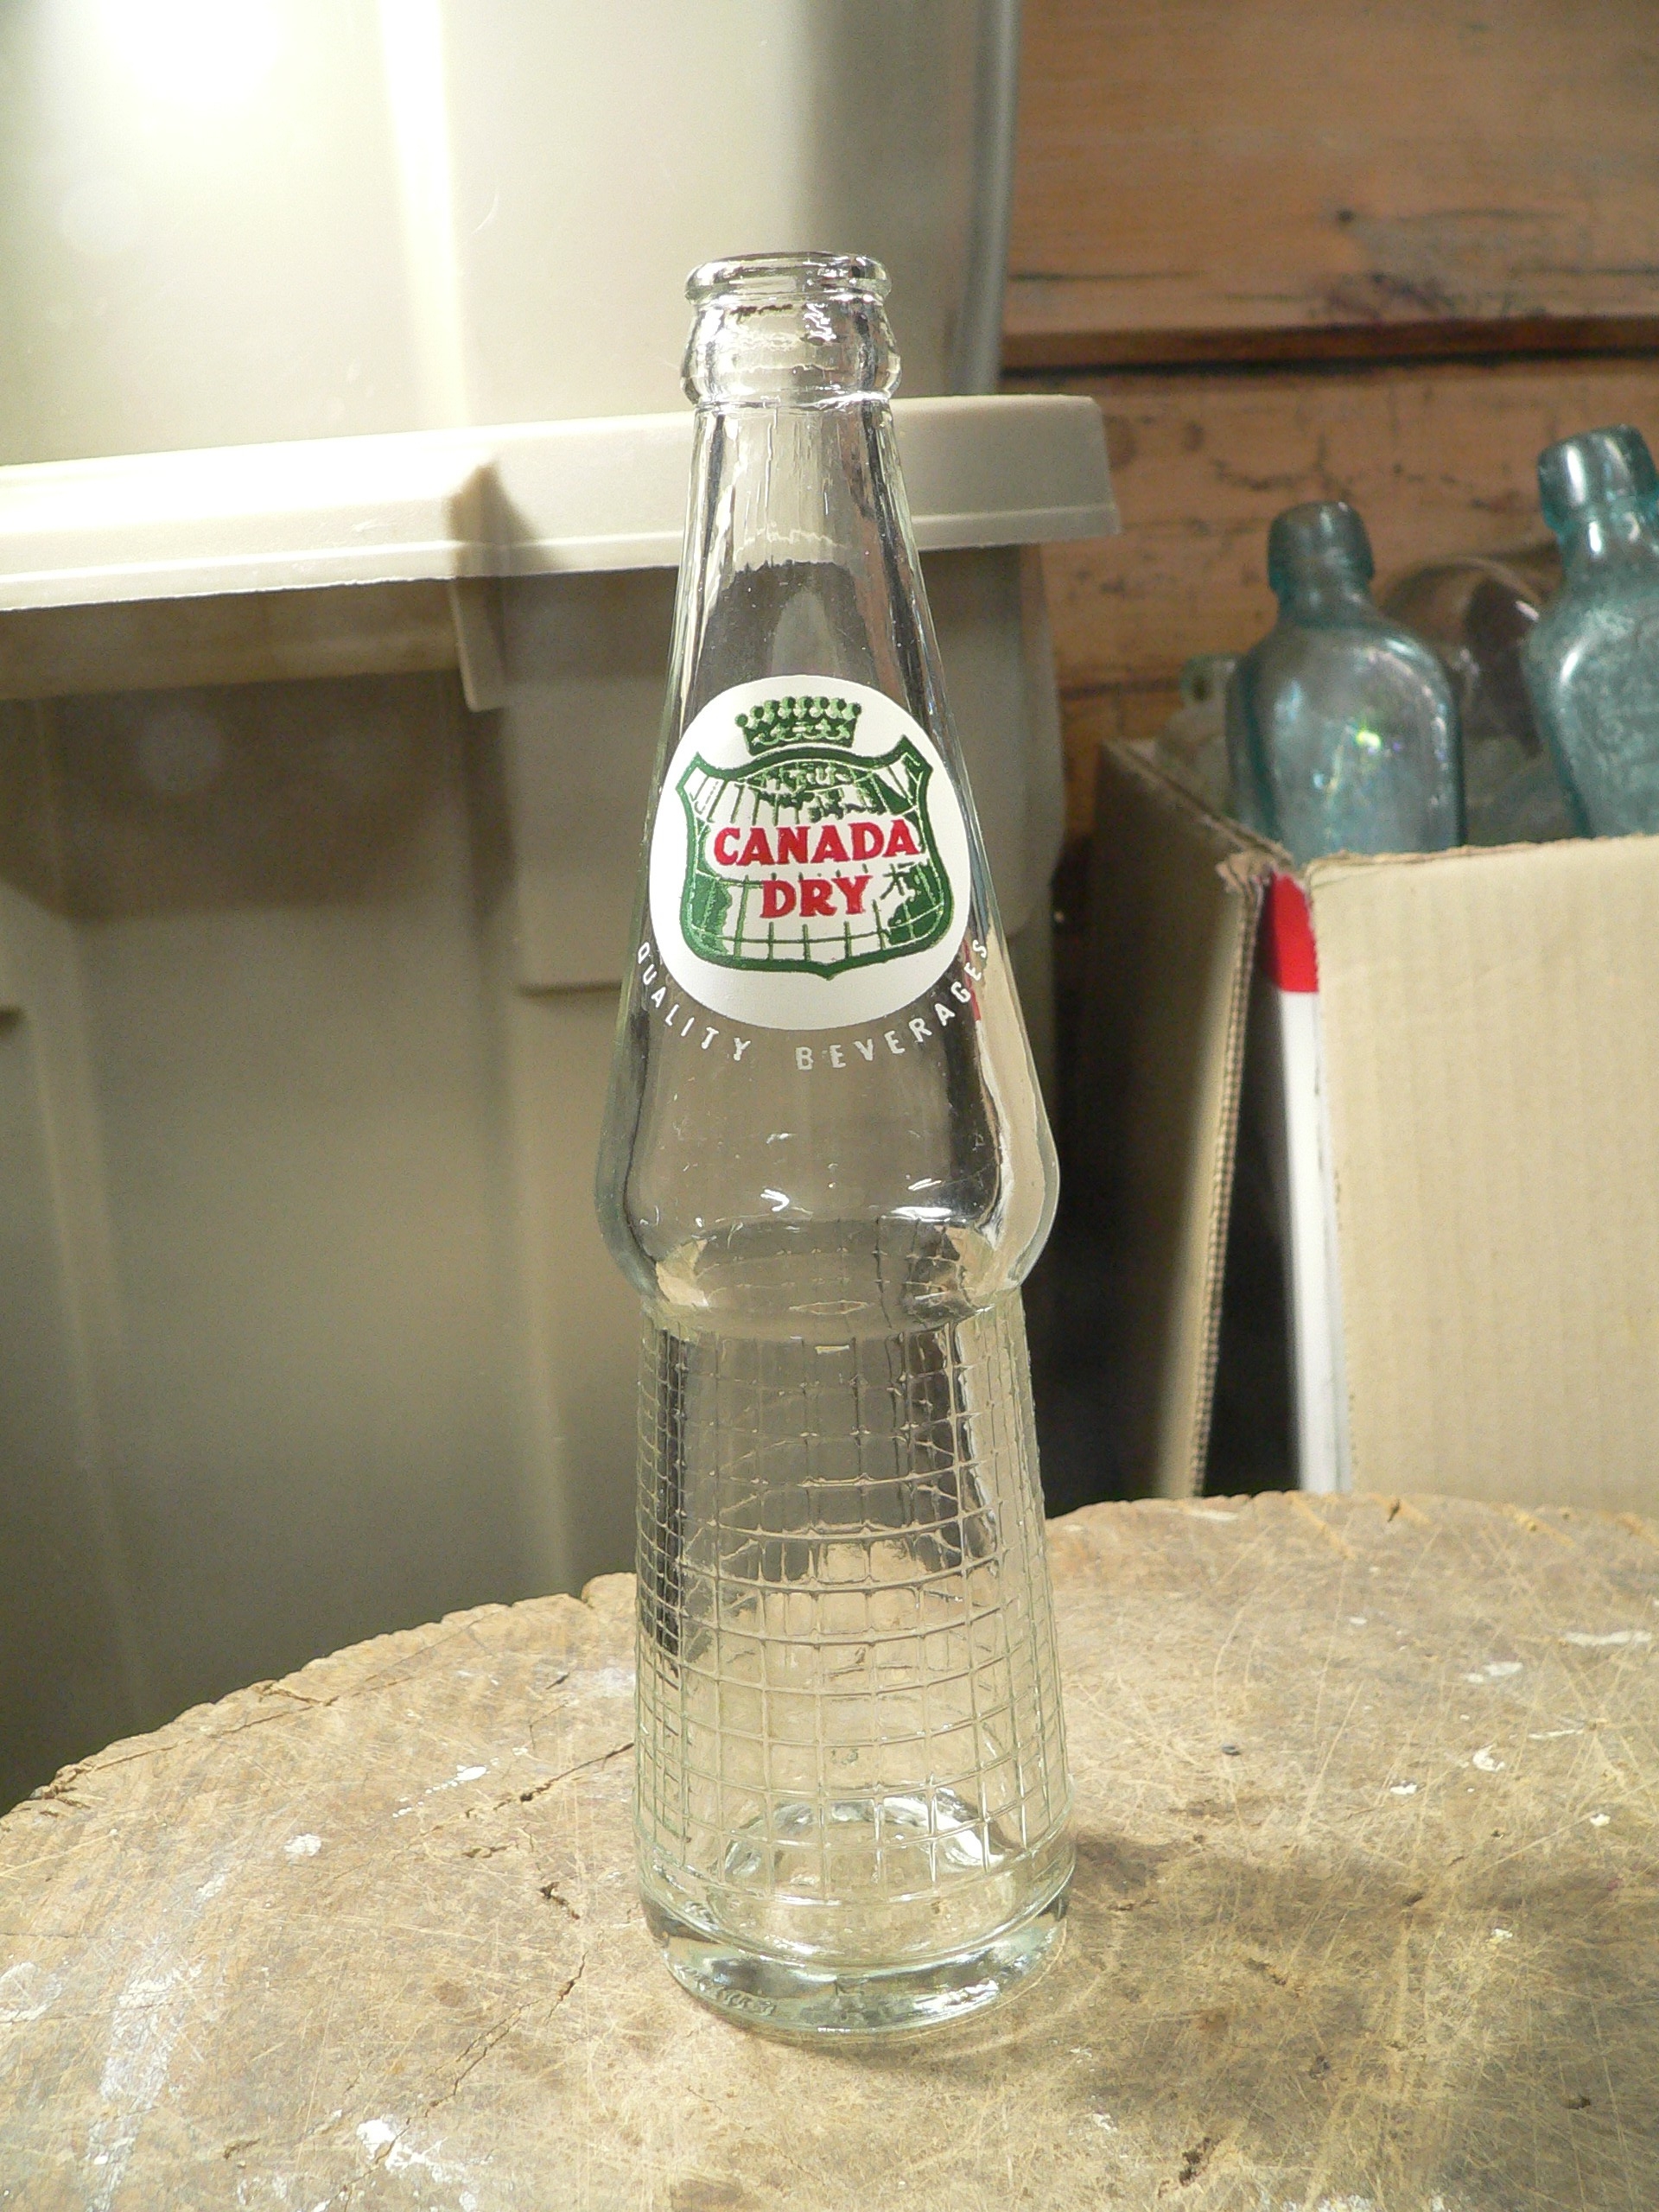 Bouteille vintage Canada dry # 8329.4